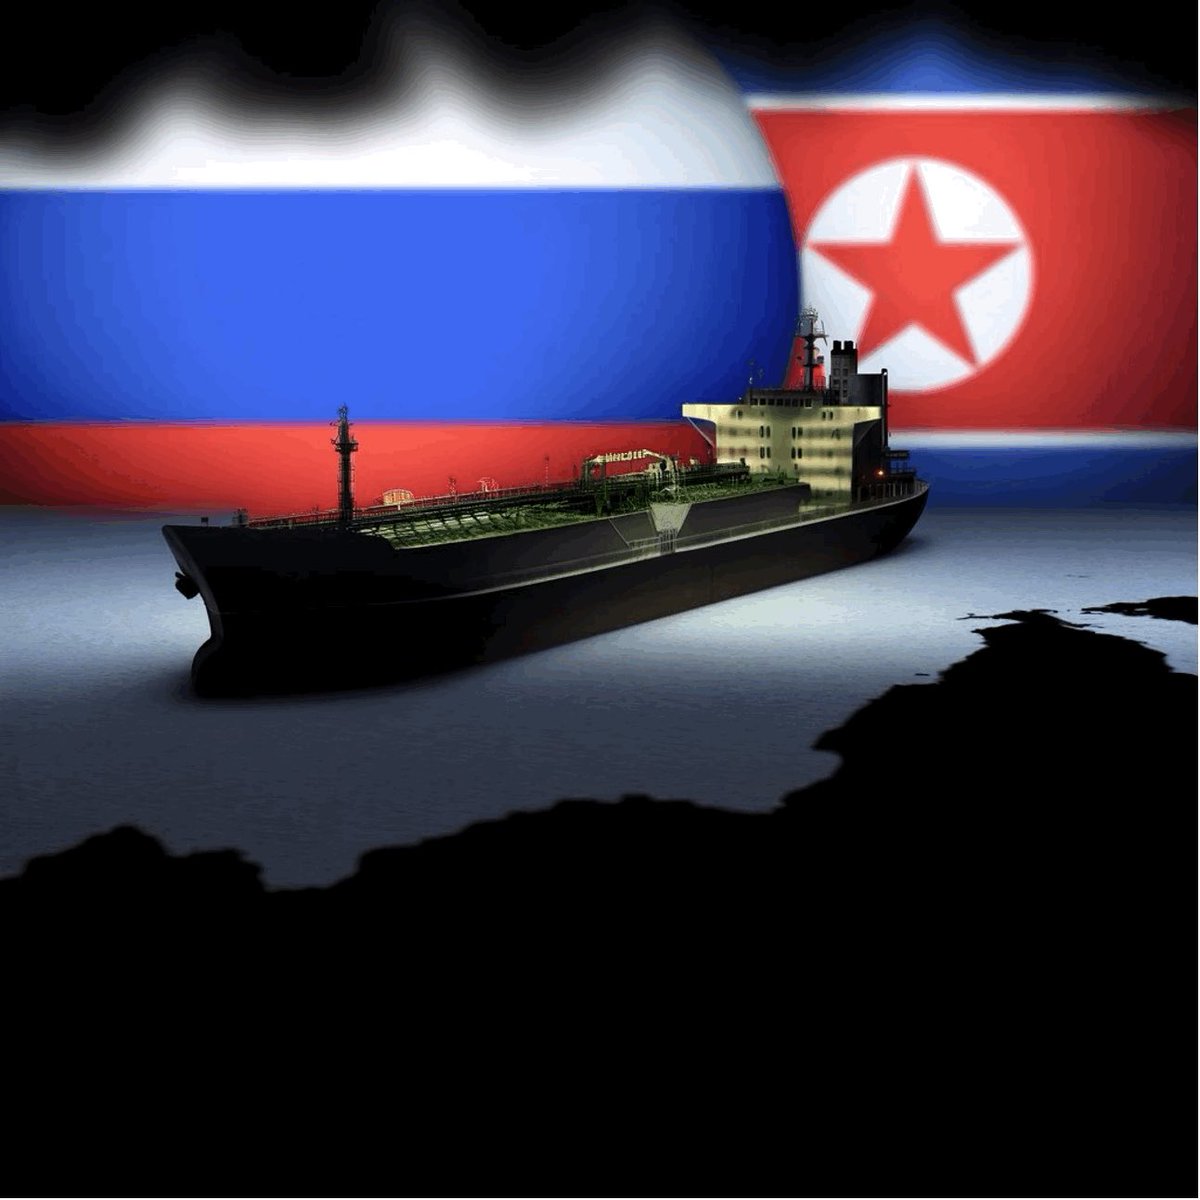 Russia secretly supplies oil to DPRK in excess of @UN Security Council limits, @Reuters reports. To facilitate the supply, Moscow has blocked the work of a UN expert group that monitors compliance with sanctions against Pyongyang. In response, Washington threatens to impose new…